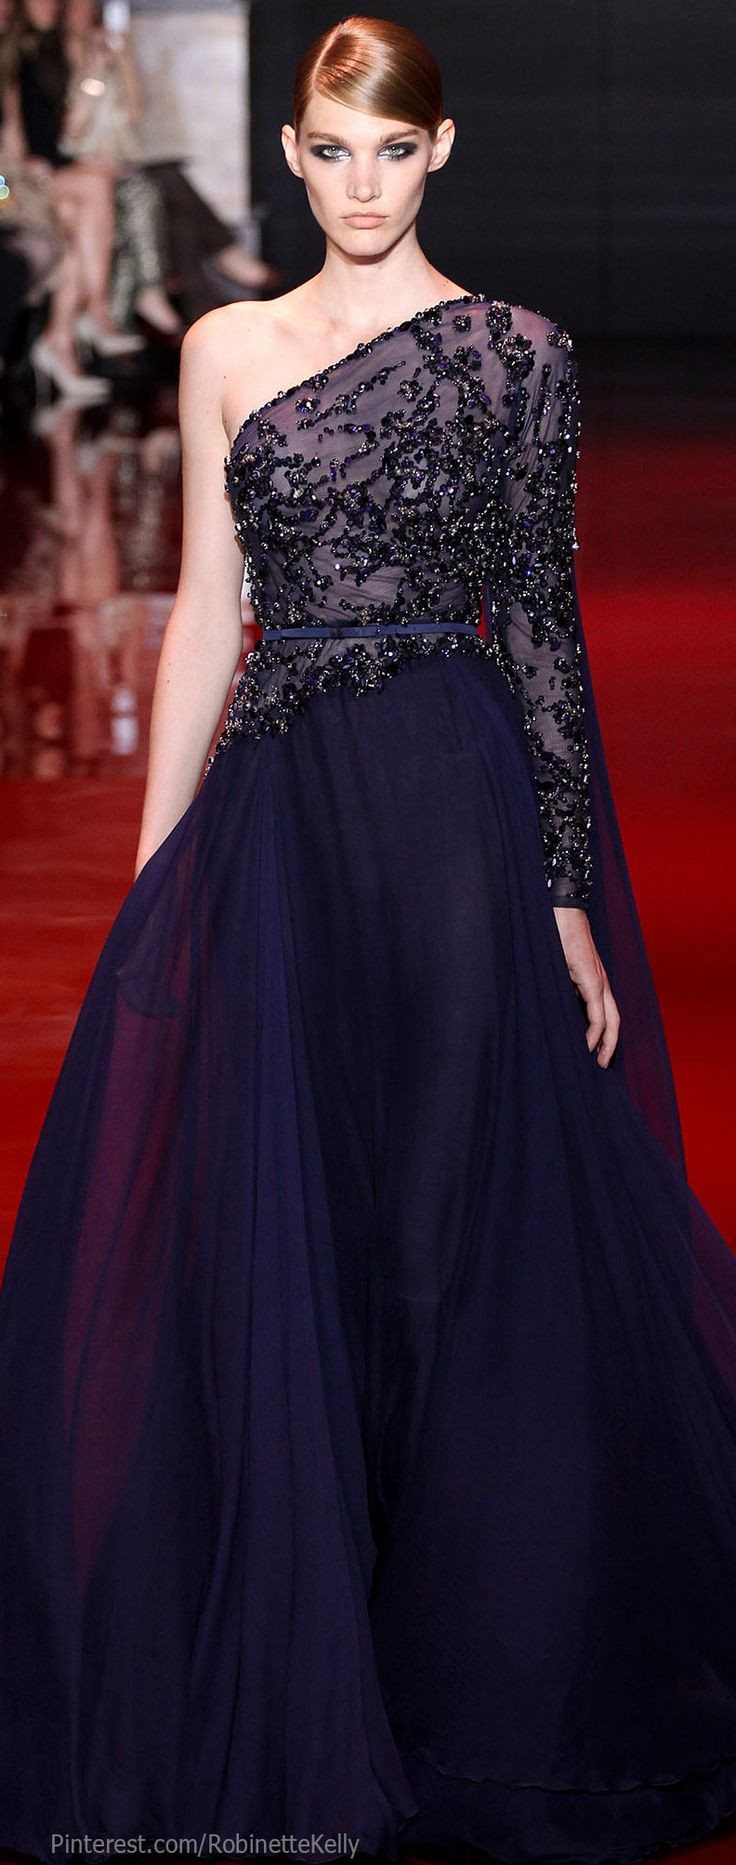 Elie Saab Haute Couture, a dark and mysterious-loo...